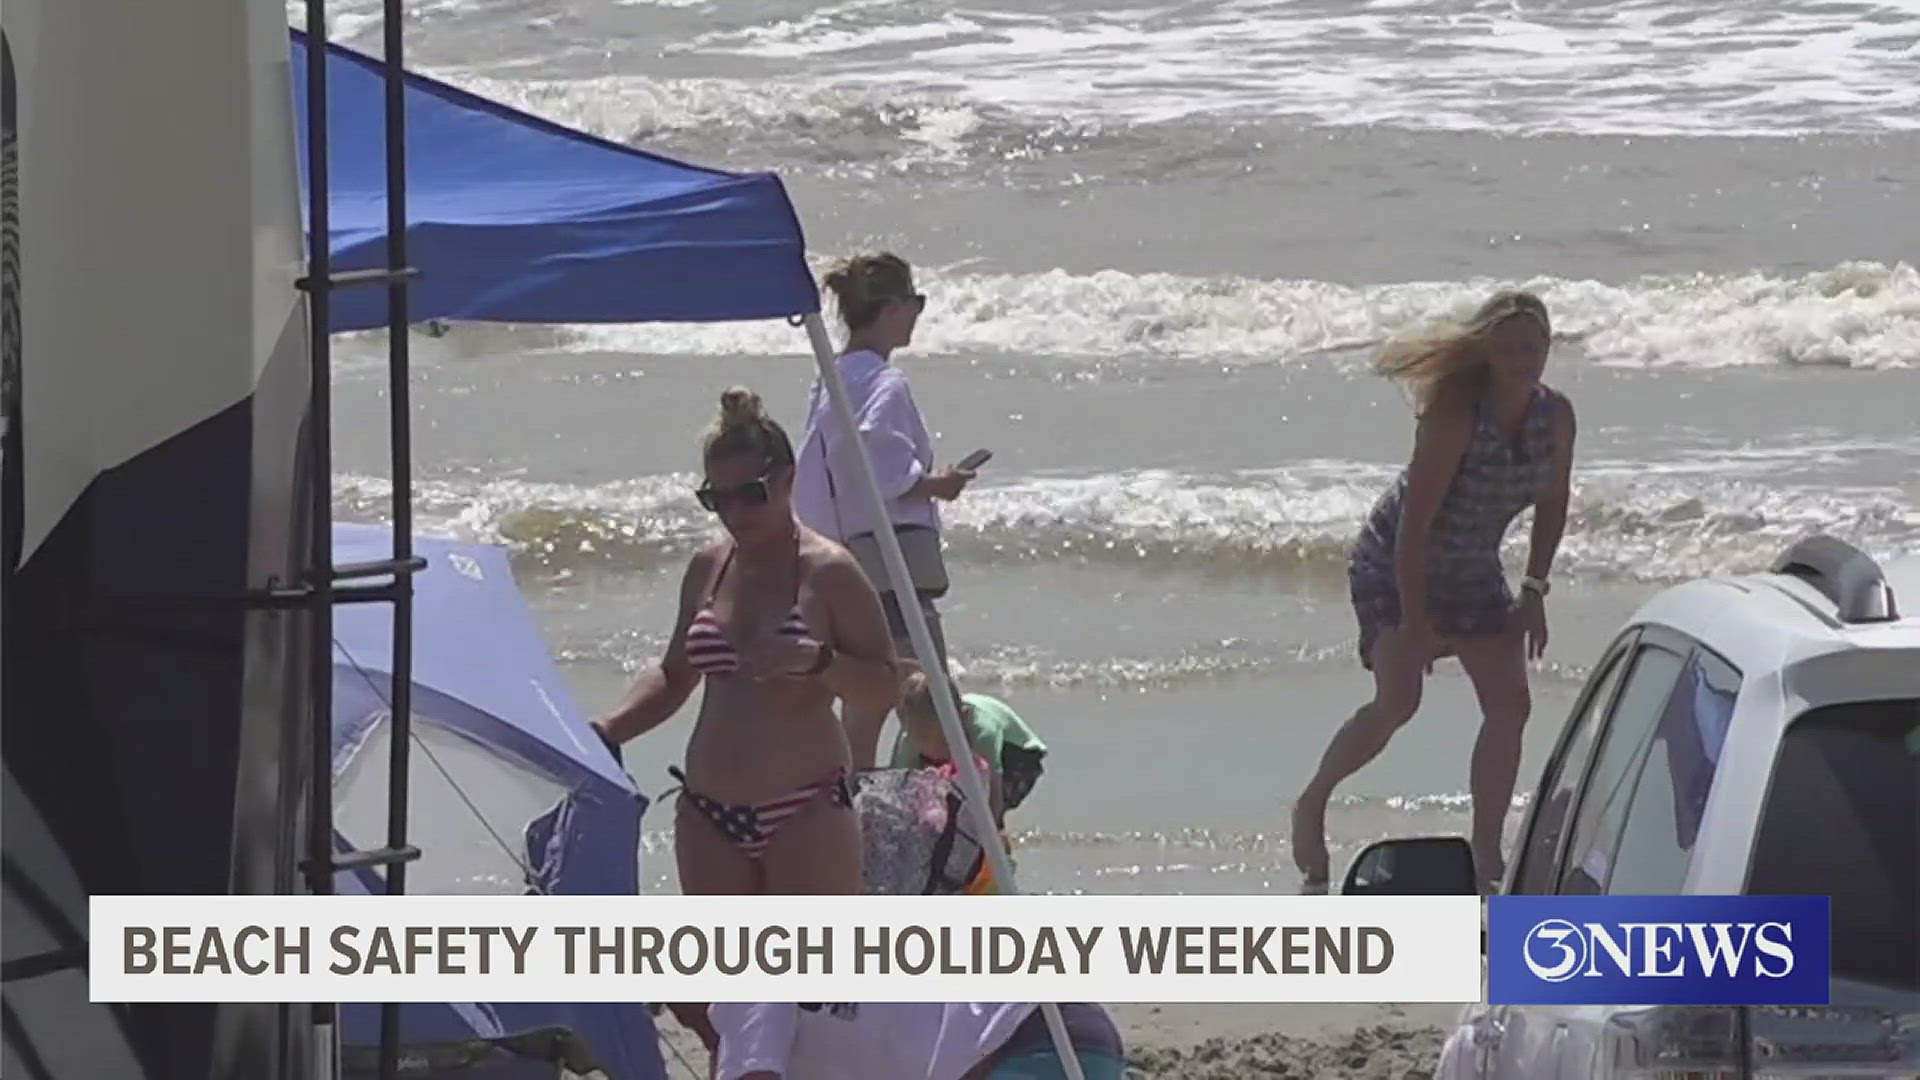 Strong rip currents and jellyfish are a few things you should be aware of if you plan to celebrate the Fourth of July at our area beaches.